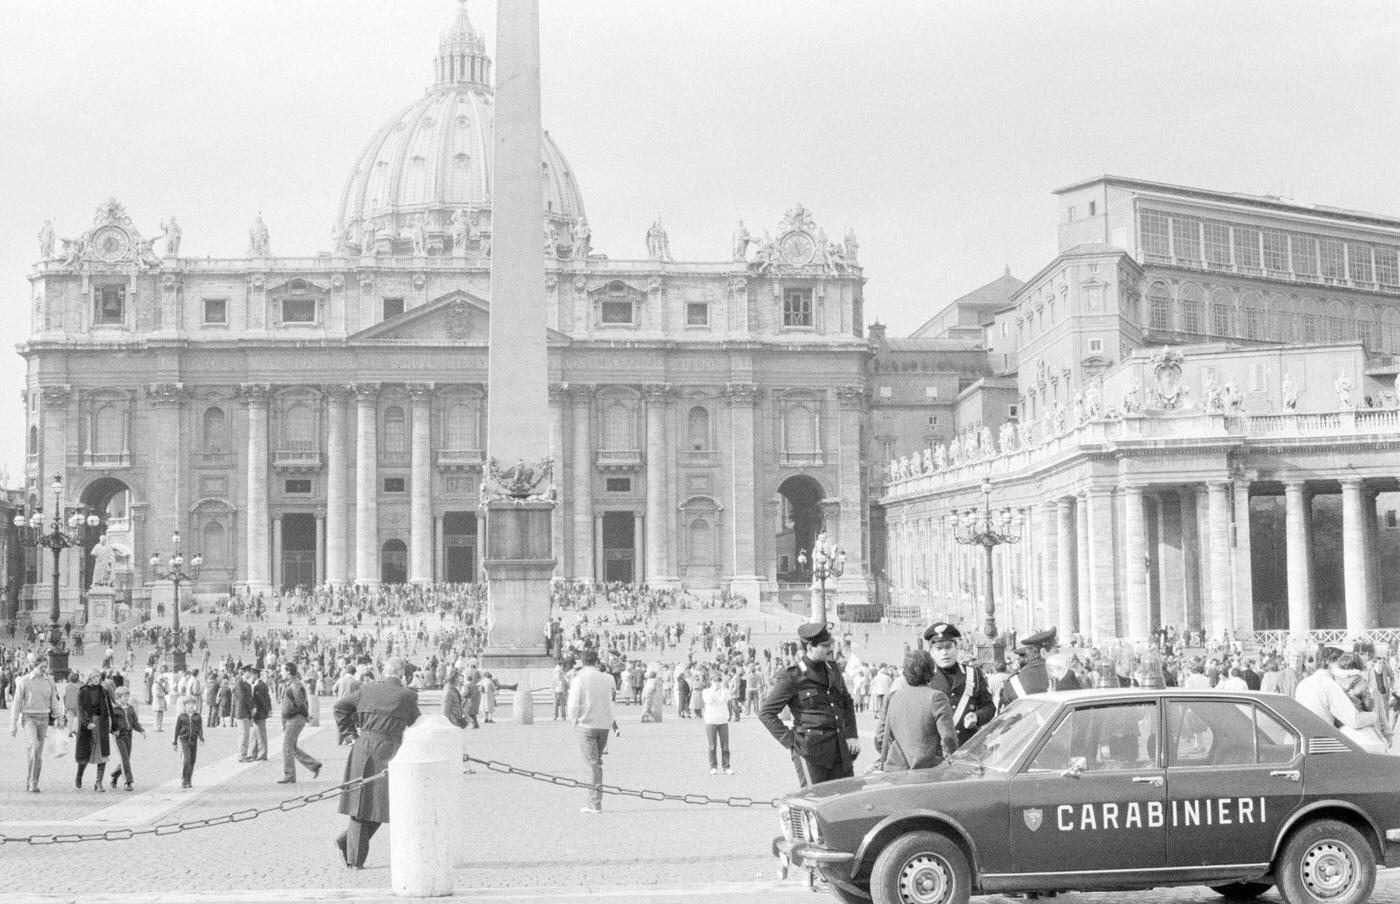 Tourists at St. Peter's Square in the Vatican, December 1982